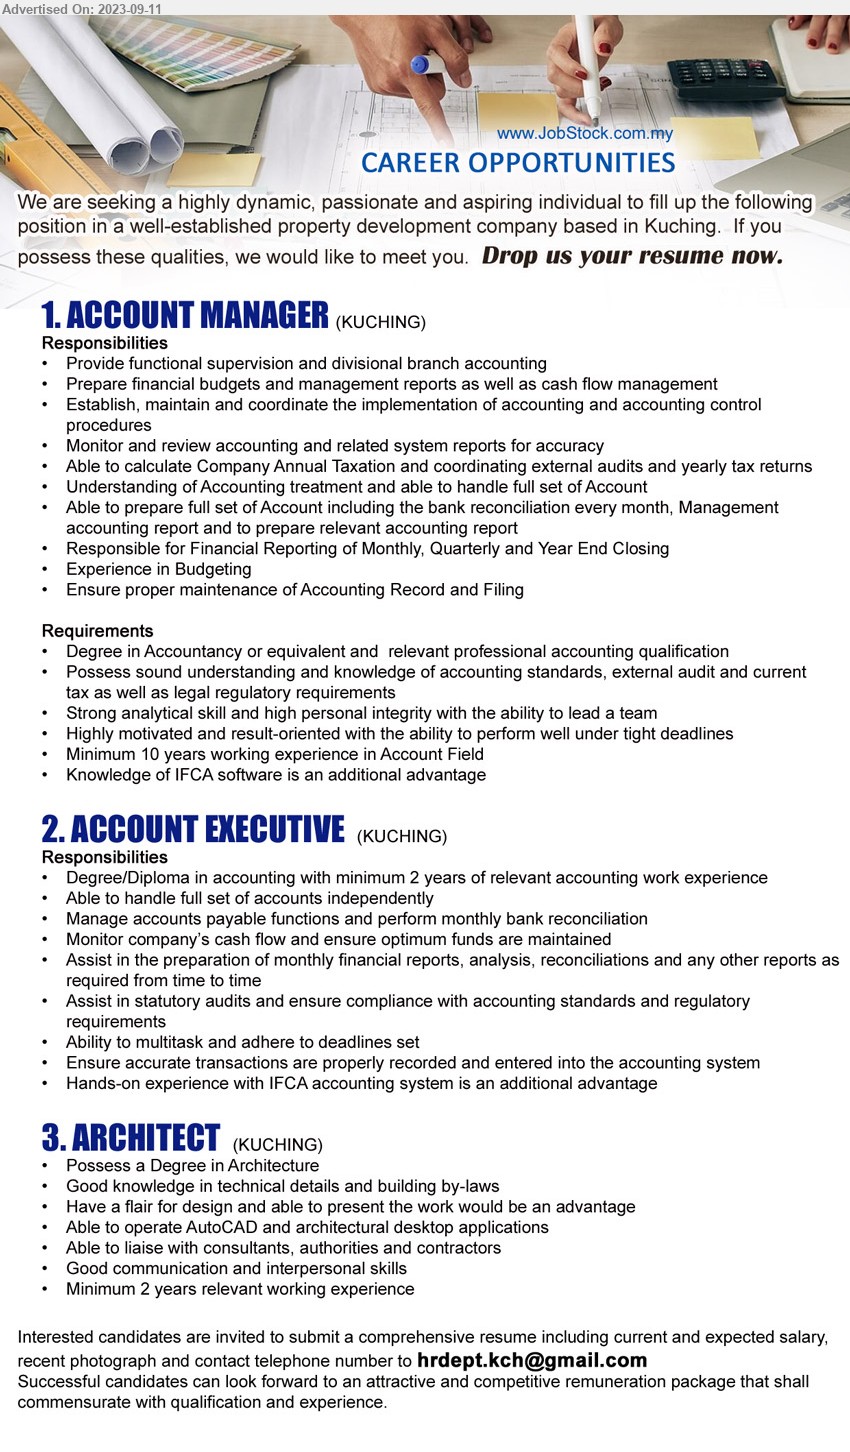 ADVERTISER - 1. ACCOUNT MANAGER (Kuching), Degree in Accountancy or equivalent and  relevant professional accounting qualification ,...
2. ACCOUNT EXECUTIVE  (Kuching), Degree/Diploma in Accounting with minimum 2 years of relevant accounting work experience ,...
3. ARCHITECT (Kuching), Degree in Architecture, Good knowledge in technical details and building by-laws,...
Email resume to ...